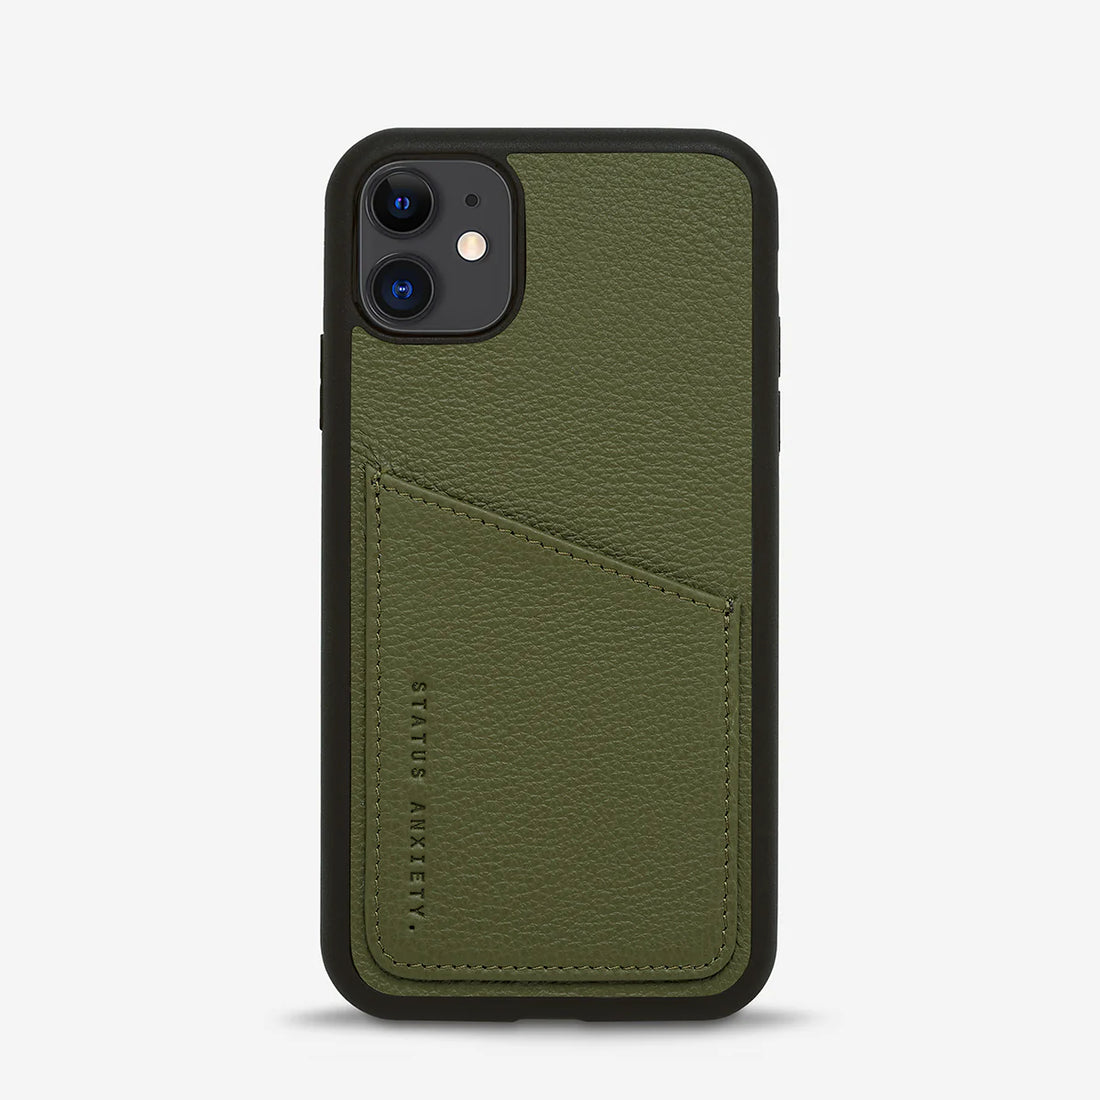 Støjende Pastor Miniature Status Anxiety Who's Who Leather Phone Case (iPhone) - Khaki